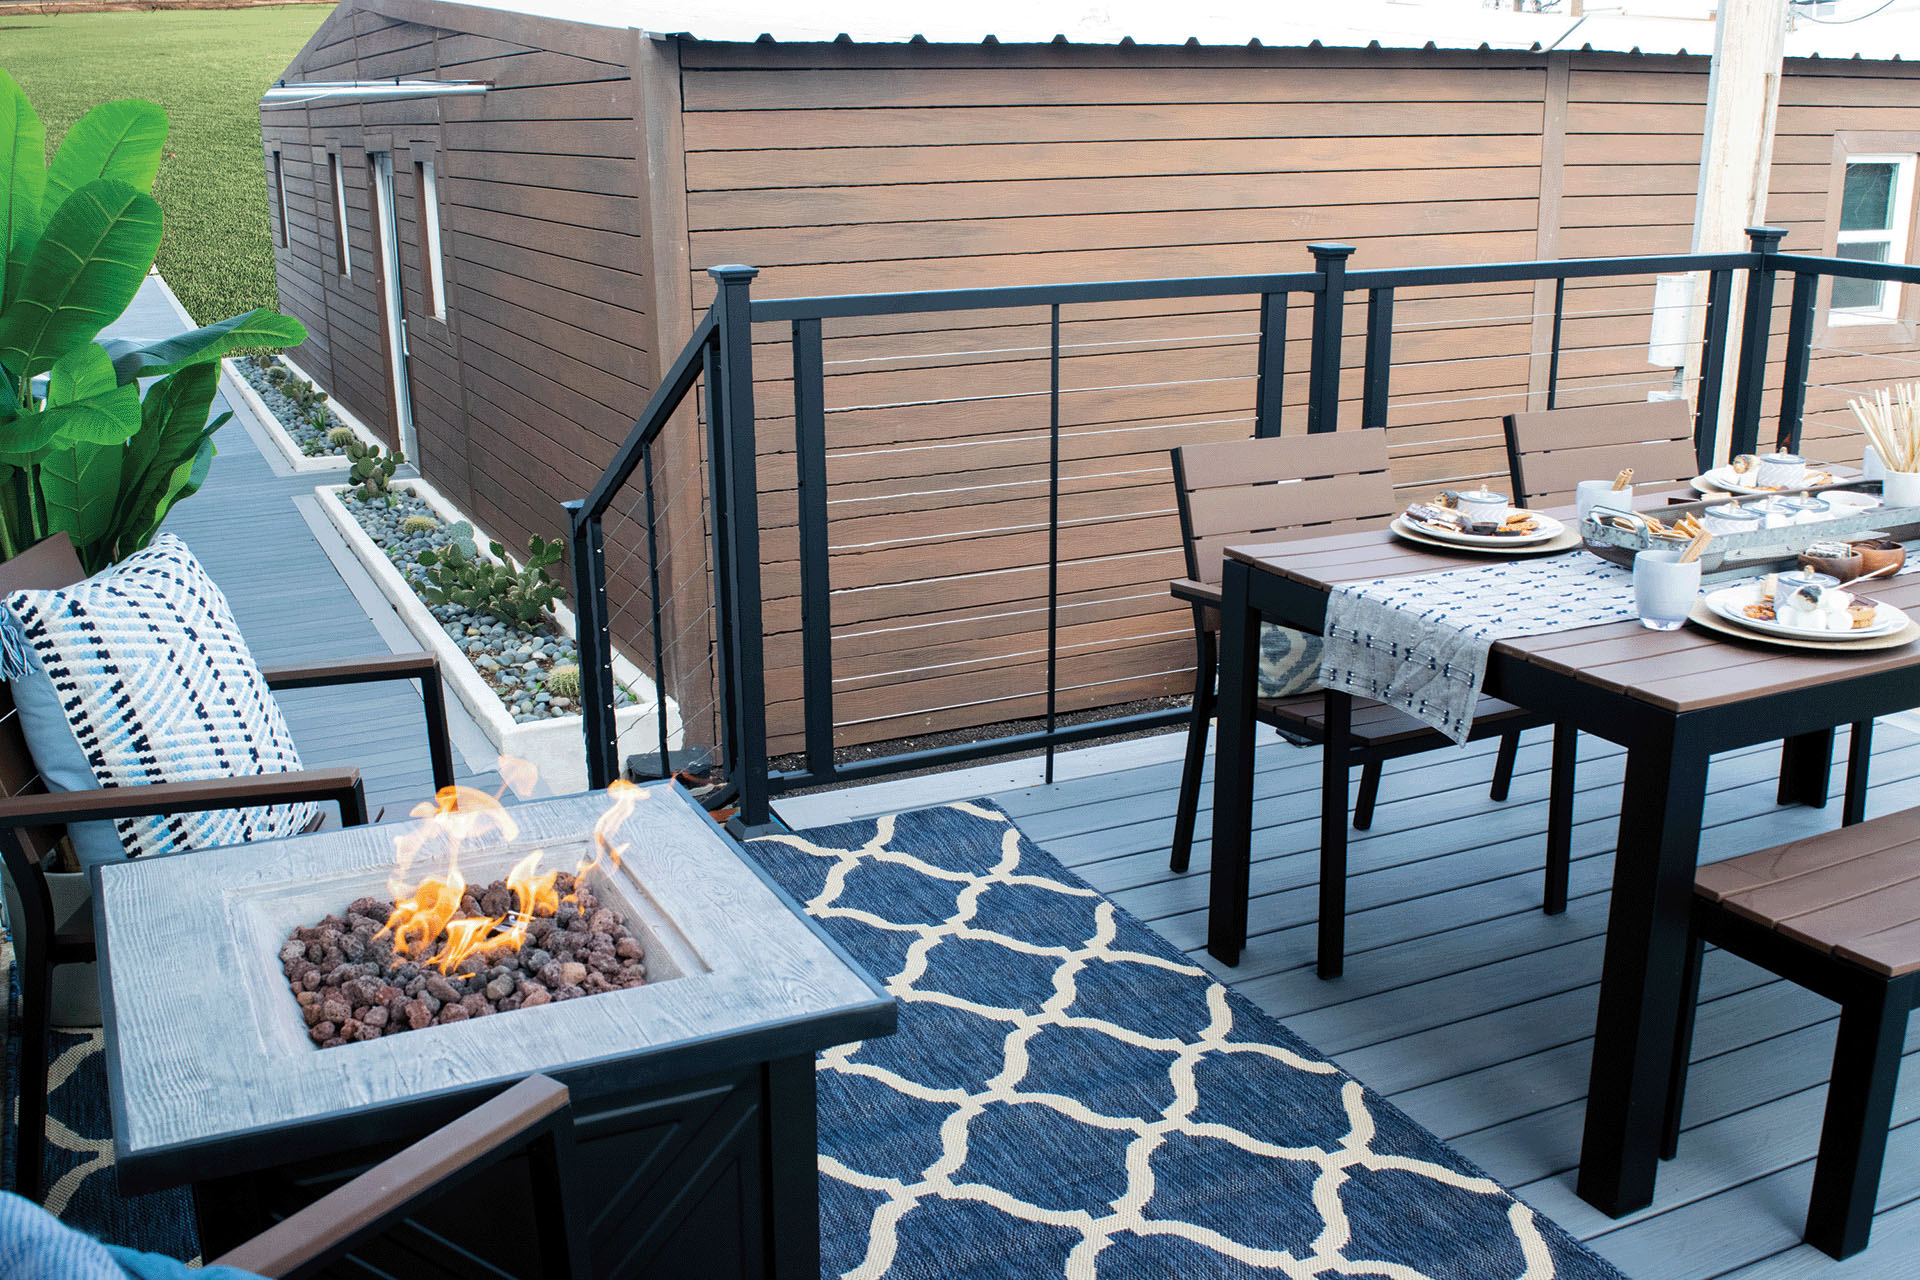 Outdoor dining area with steel railings on a raised deck